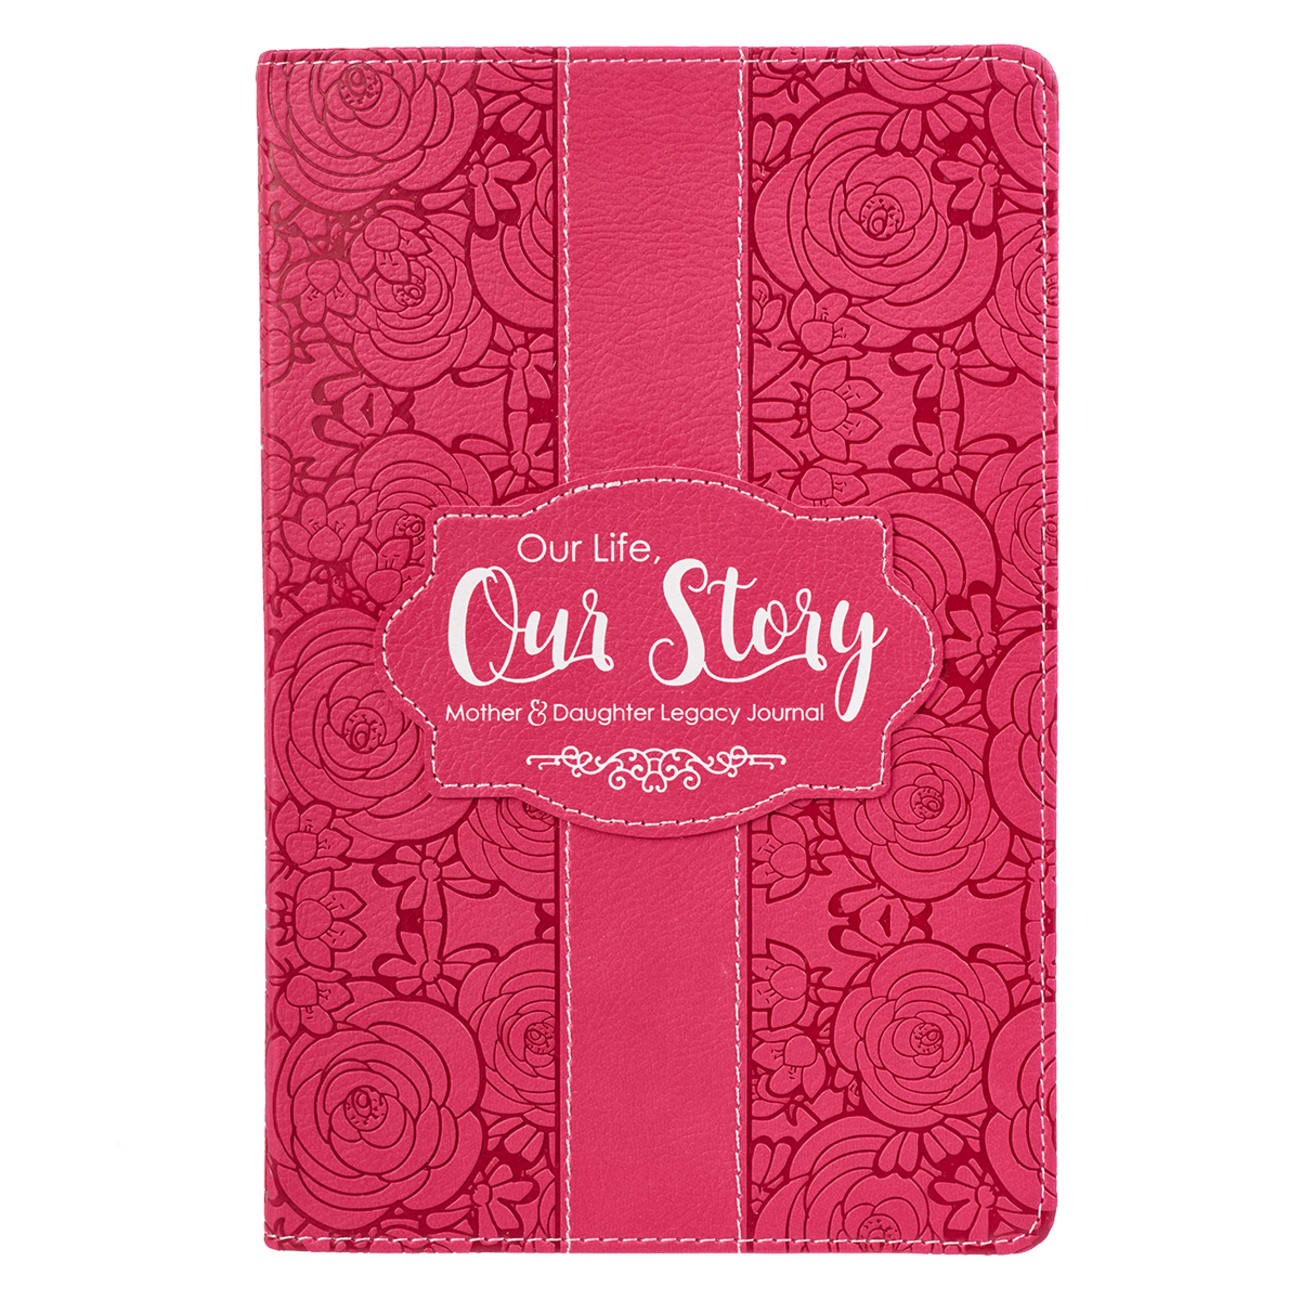 Legacy Journal: Our Life, Our Story, Dark Pink/Floral, Luxleather Imitation Leather